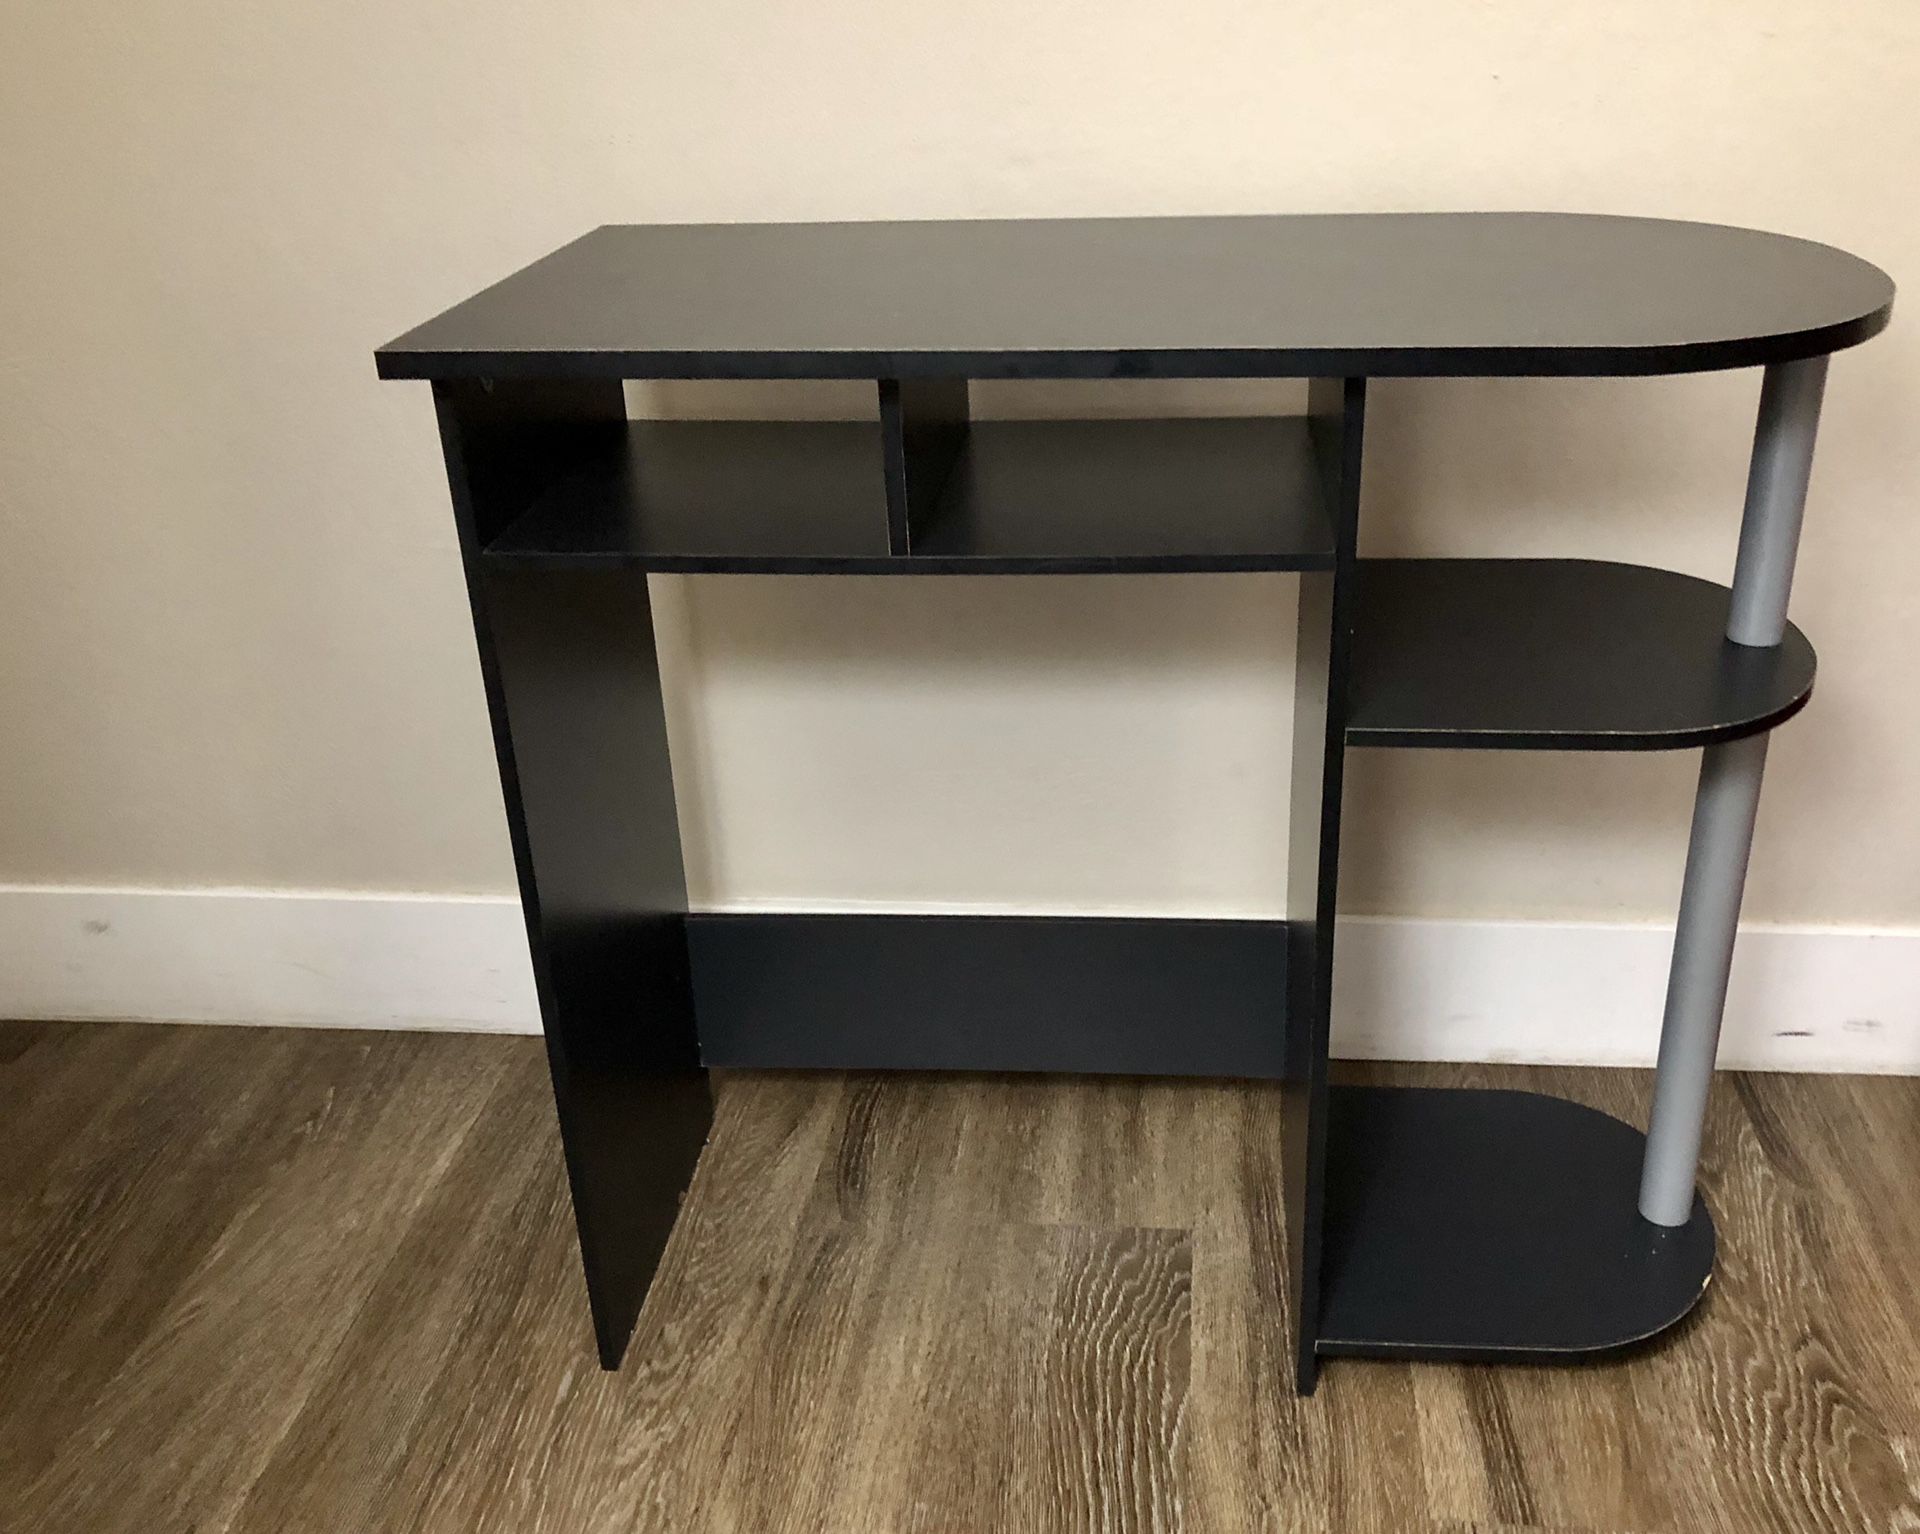 Cute small light weight desk. Great kids desk or for a small room. It also makes a great vanity, which is what it was used for